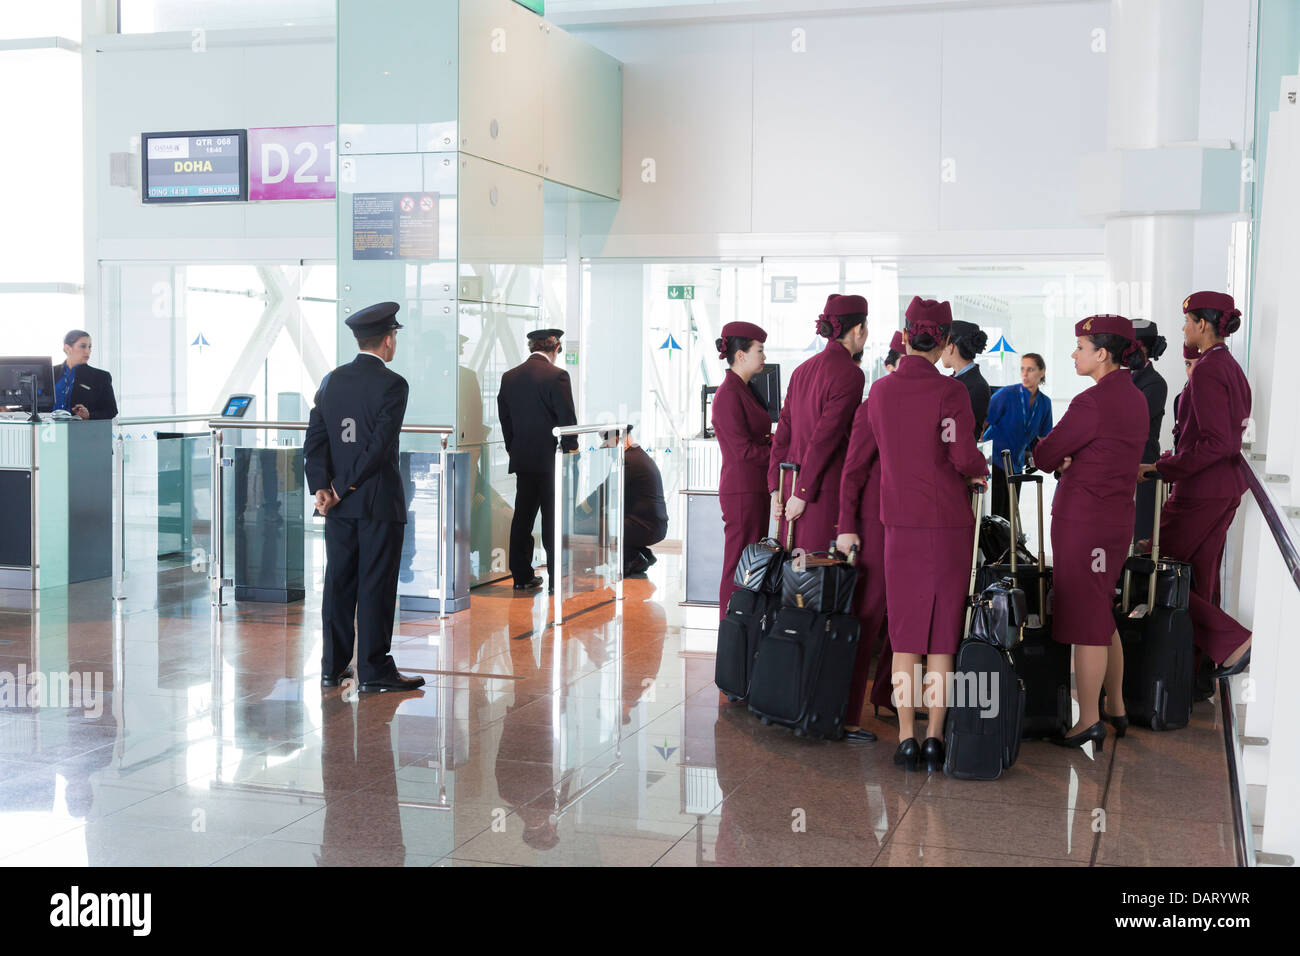 Qatar airways pilots and cabin staff waiting at airport departure gate. Stock Photo